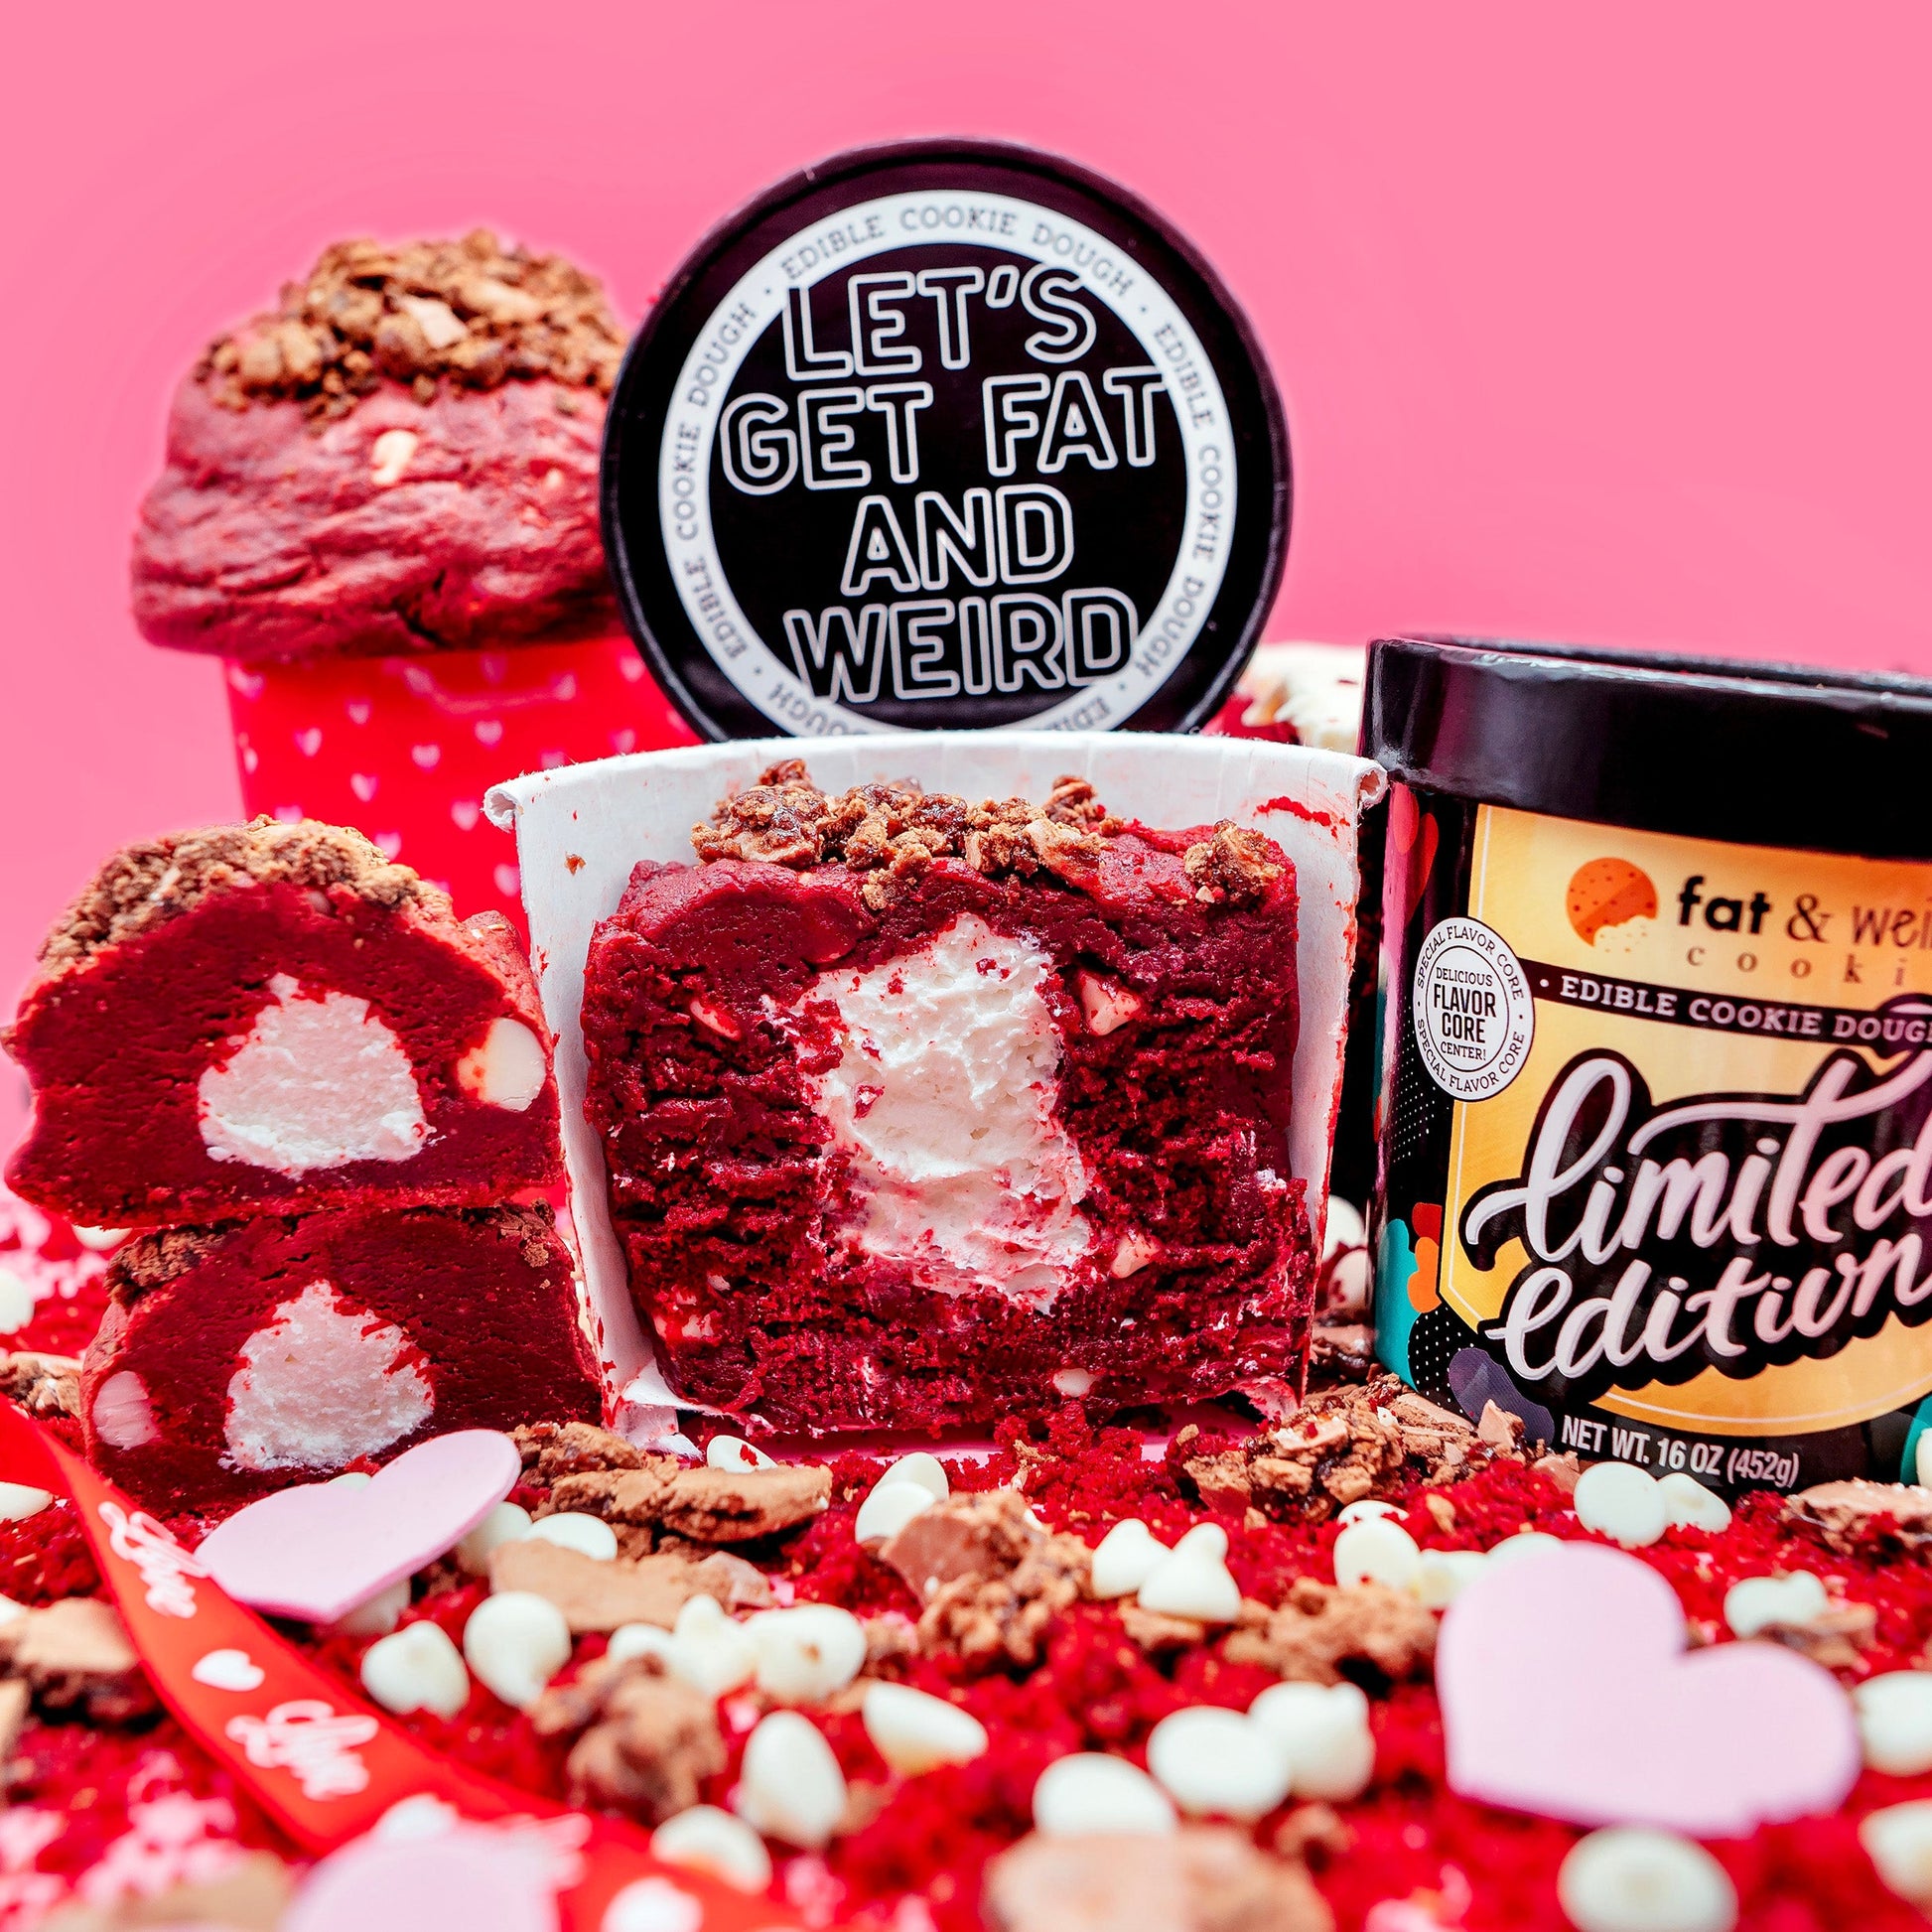 Limited Edition Edible Cookie Dough 50 Shades of Red Cookie Dough Fat & Weird Cookie 